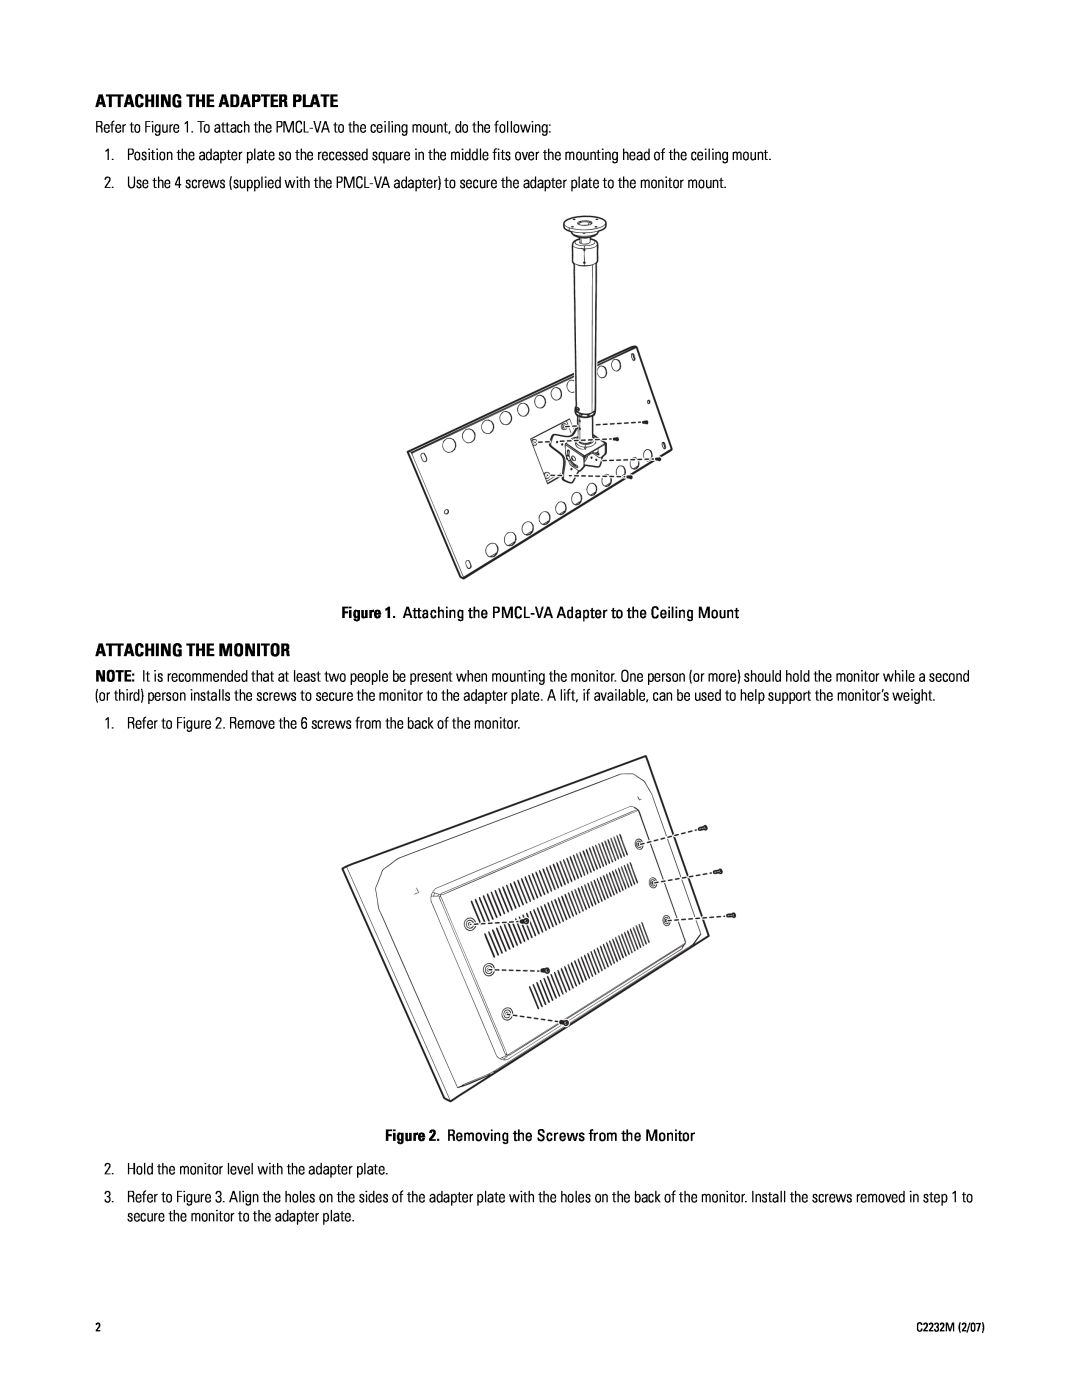 Pelco C2232M important safety instructions Attaching The Adapter Plate, Attaching The Monitor 